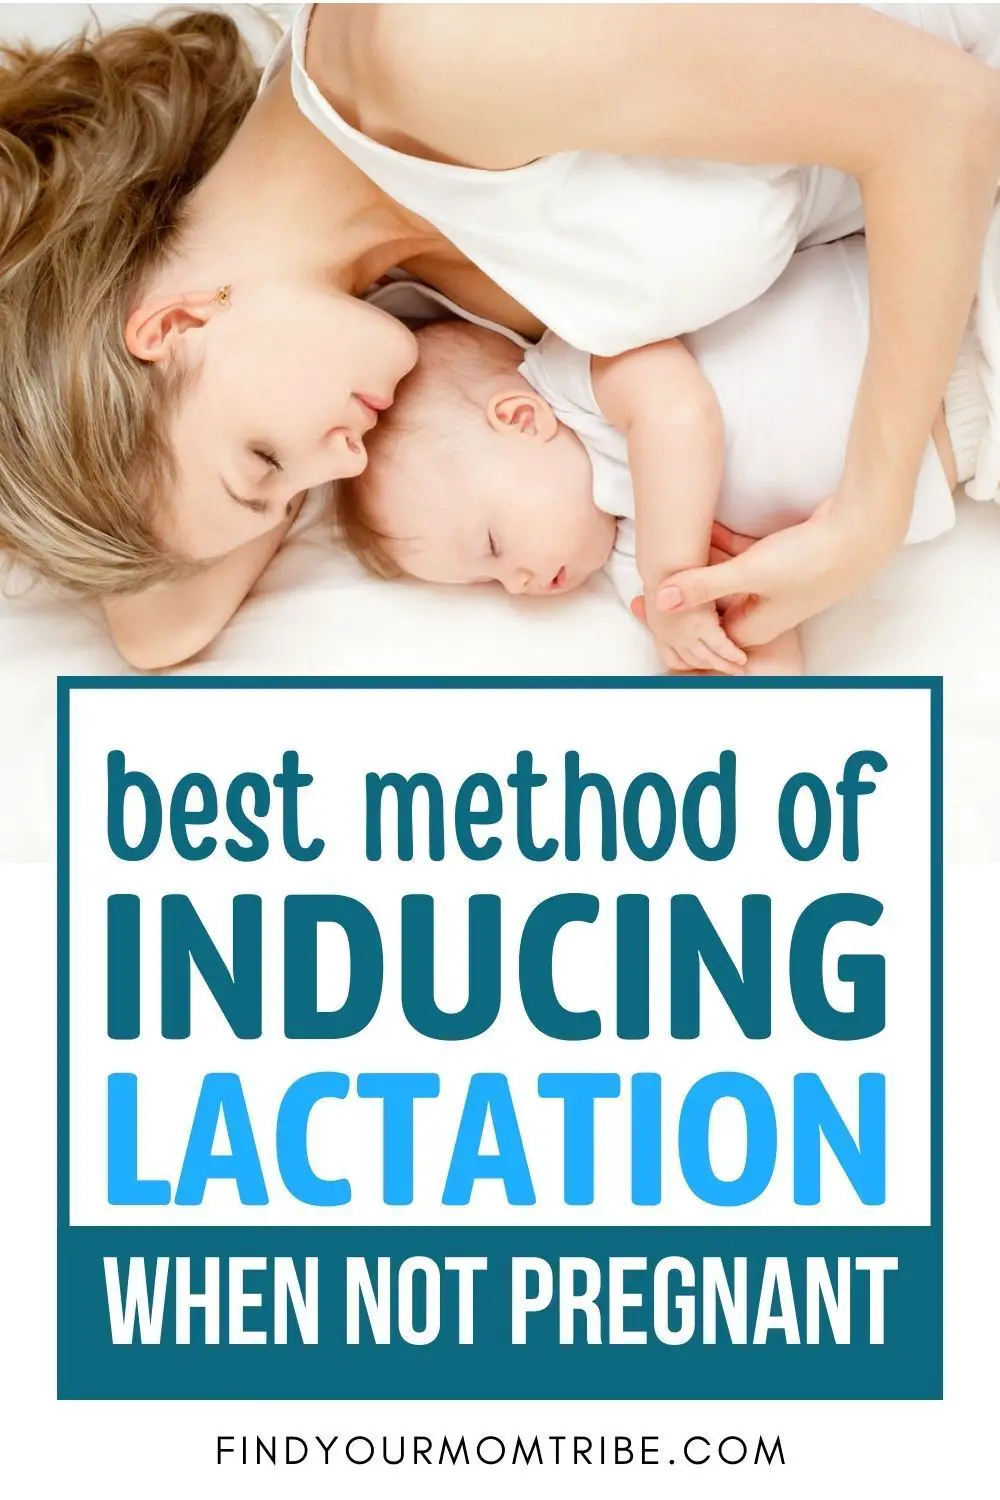 Best Method Of Inducing Lactation When Not Pregnant in 2021